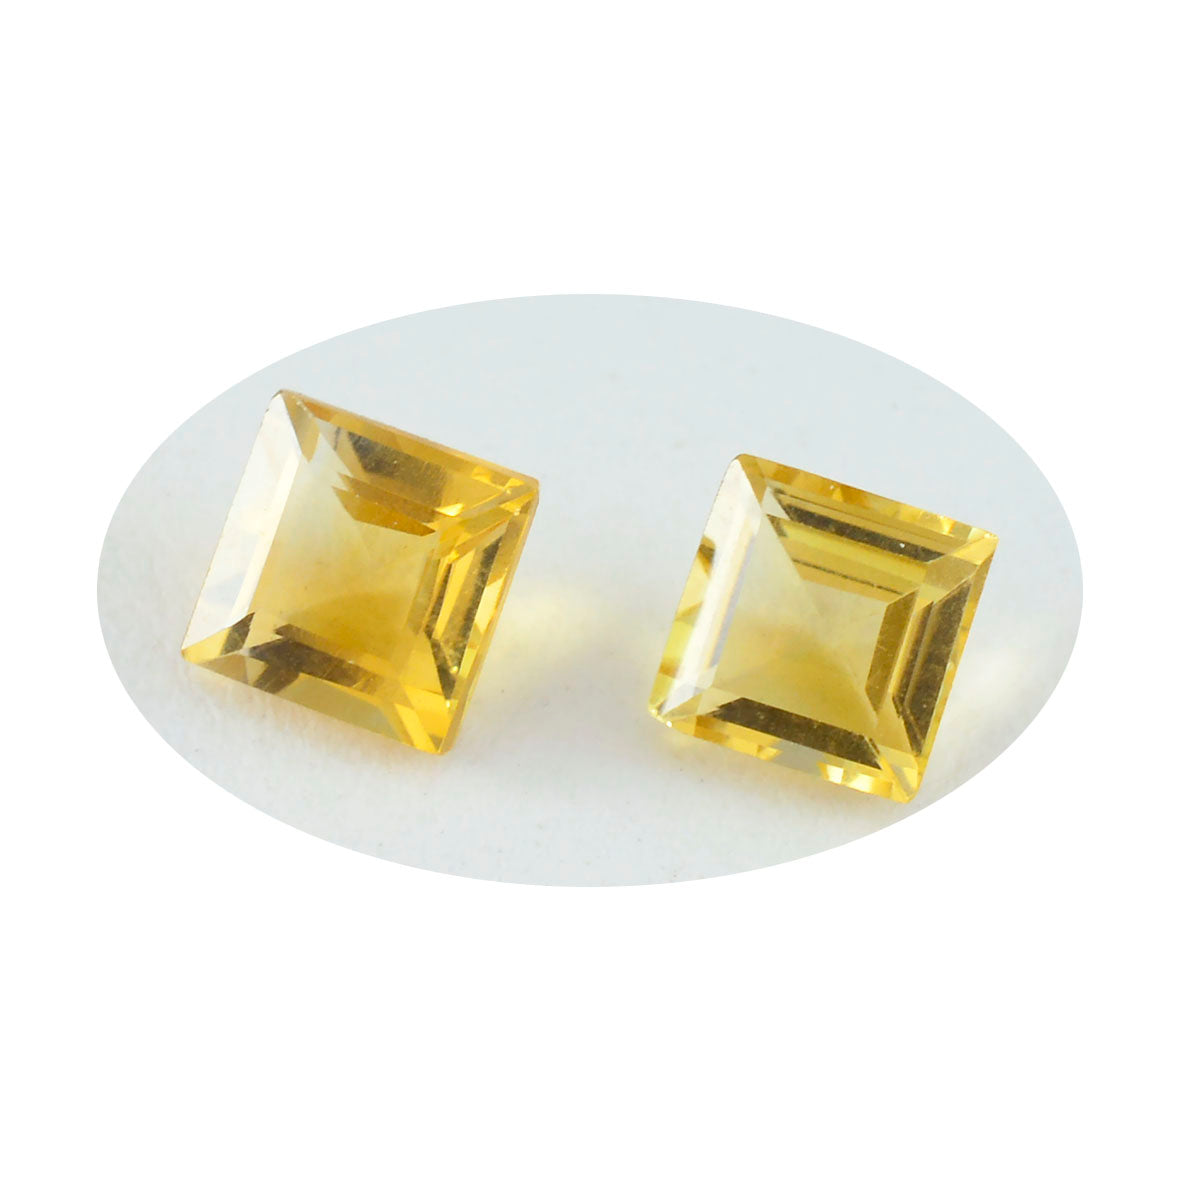 Riyogems 1PC Natural Yellow Citrine Faceted 9x9 mm Square Shape good-looking Quality Loose Stone